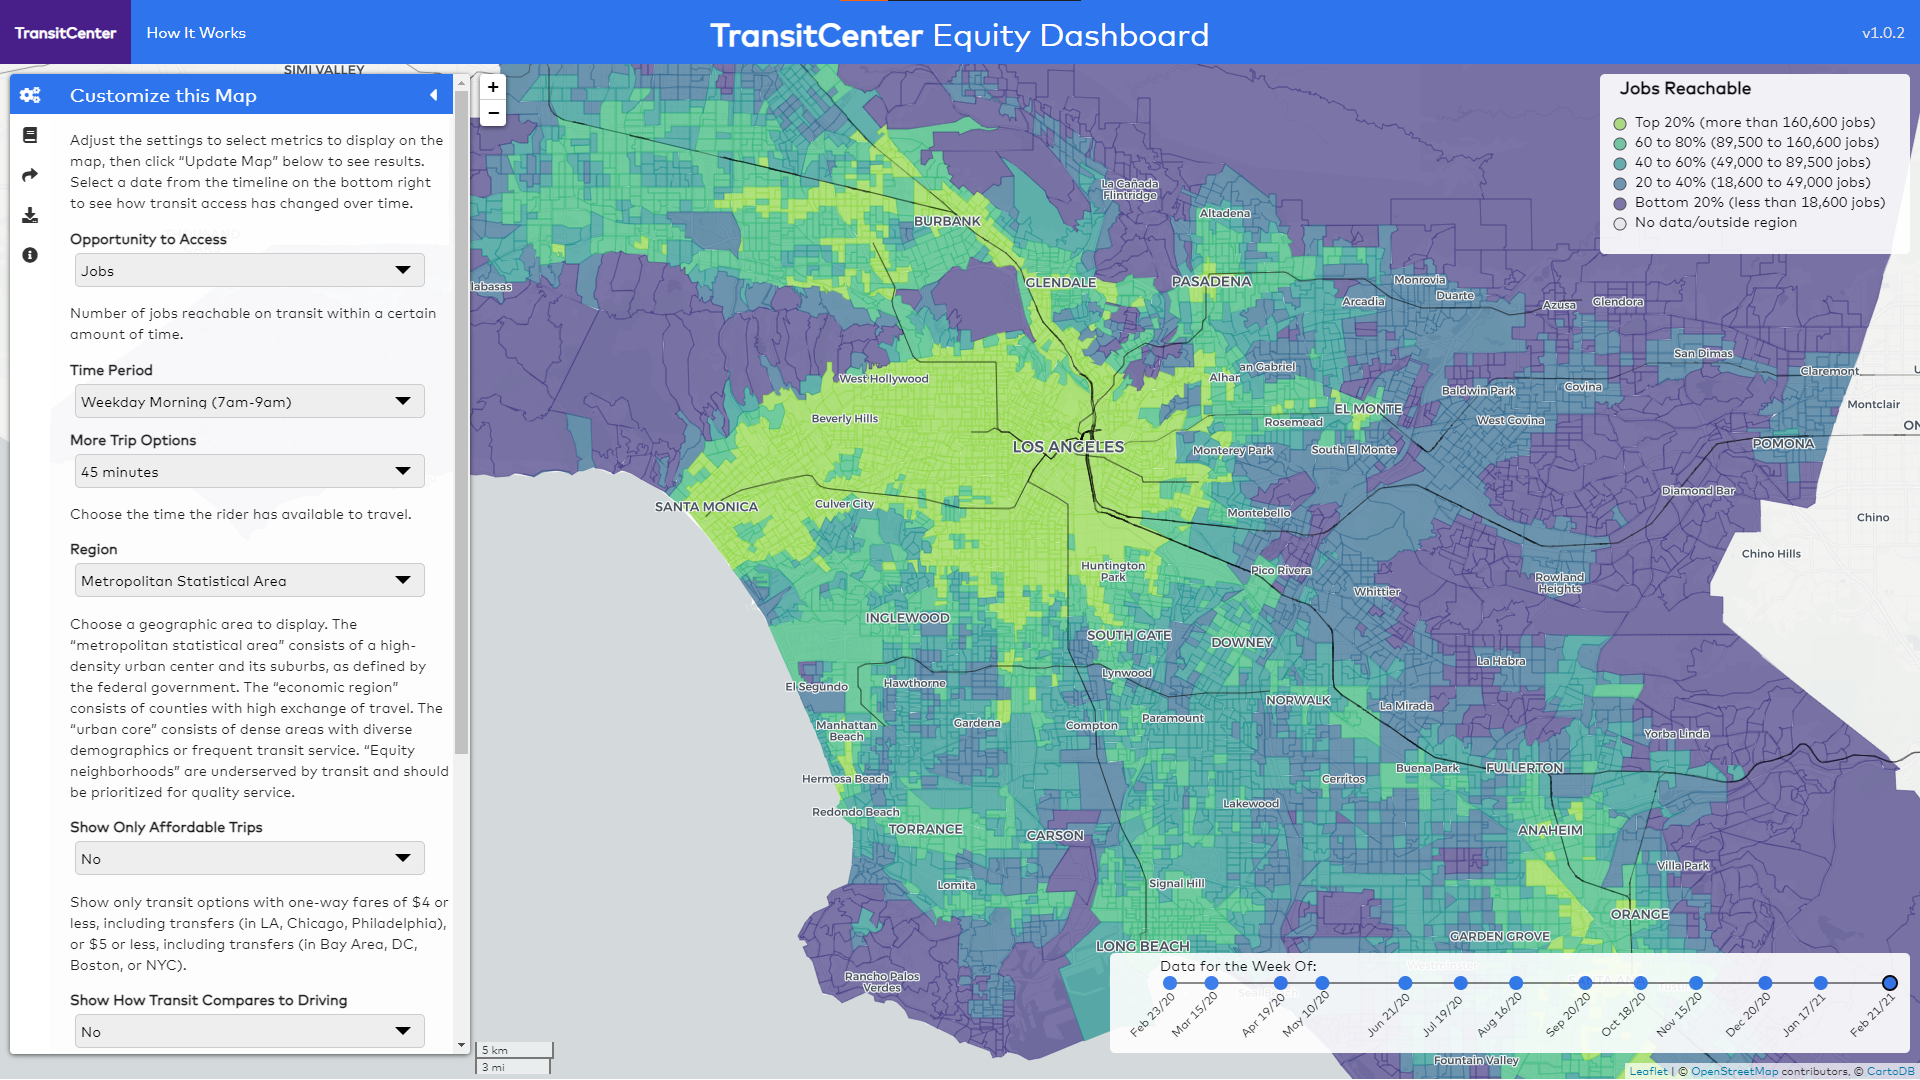 colourful map visualization of transit equity data 